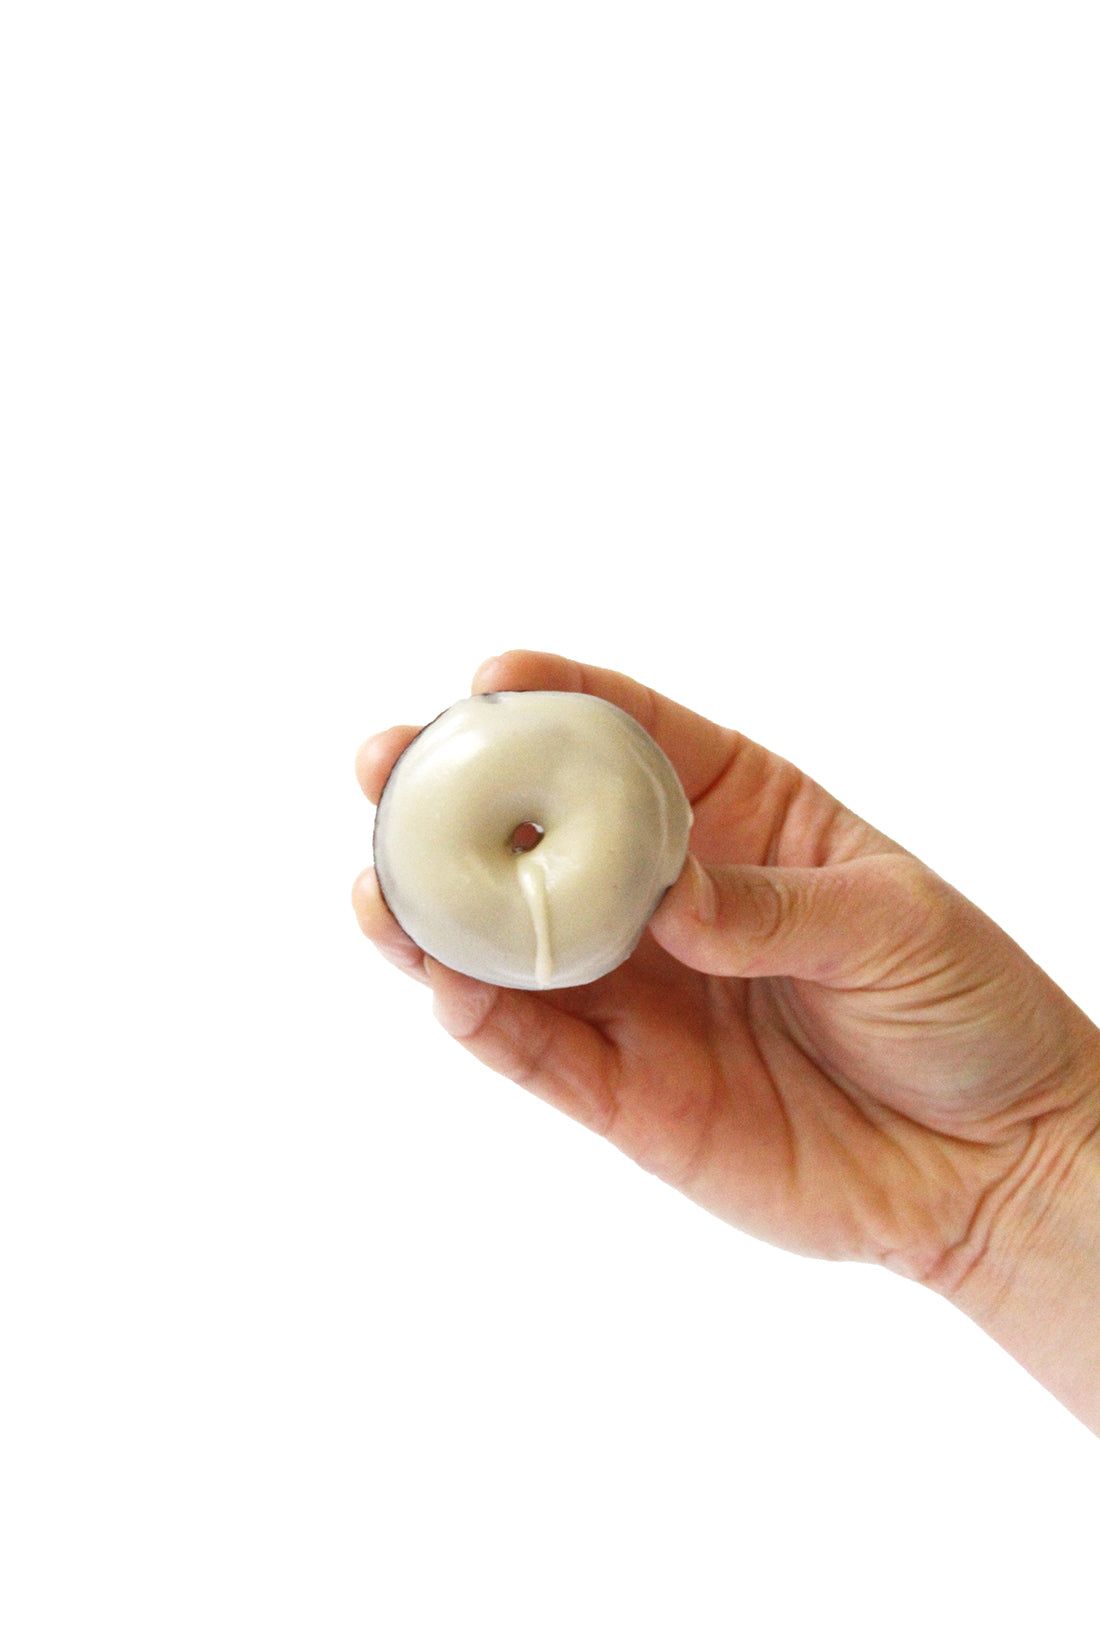 Image of a hand holding up a Miss Jones Baking Co Thin Mint Donut